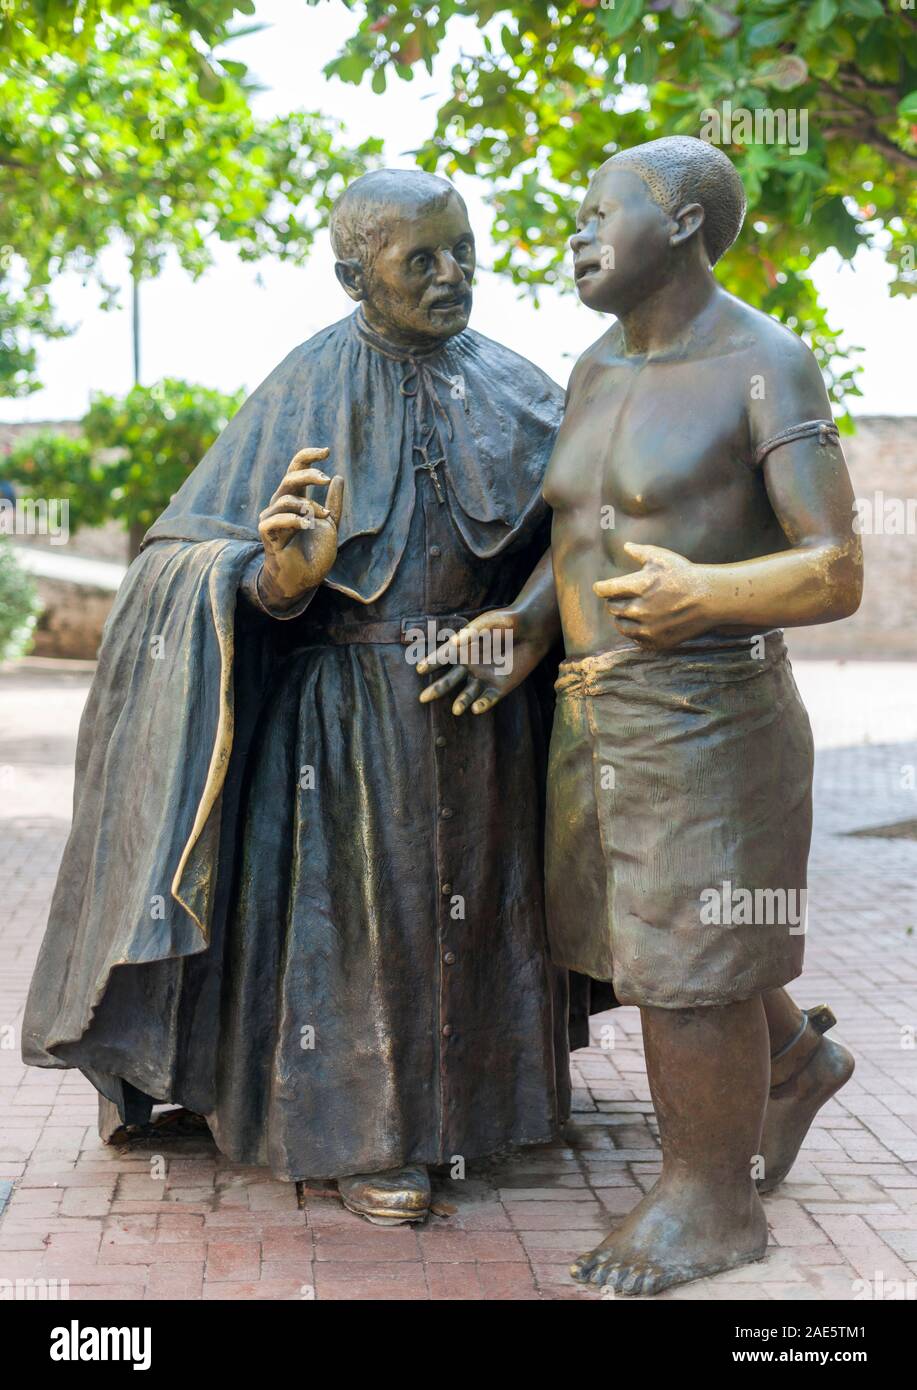 Sculpture of  San Pedro Claver in the old city in Cartagena, Colombia. Stock Photo